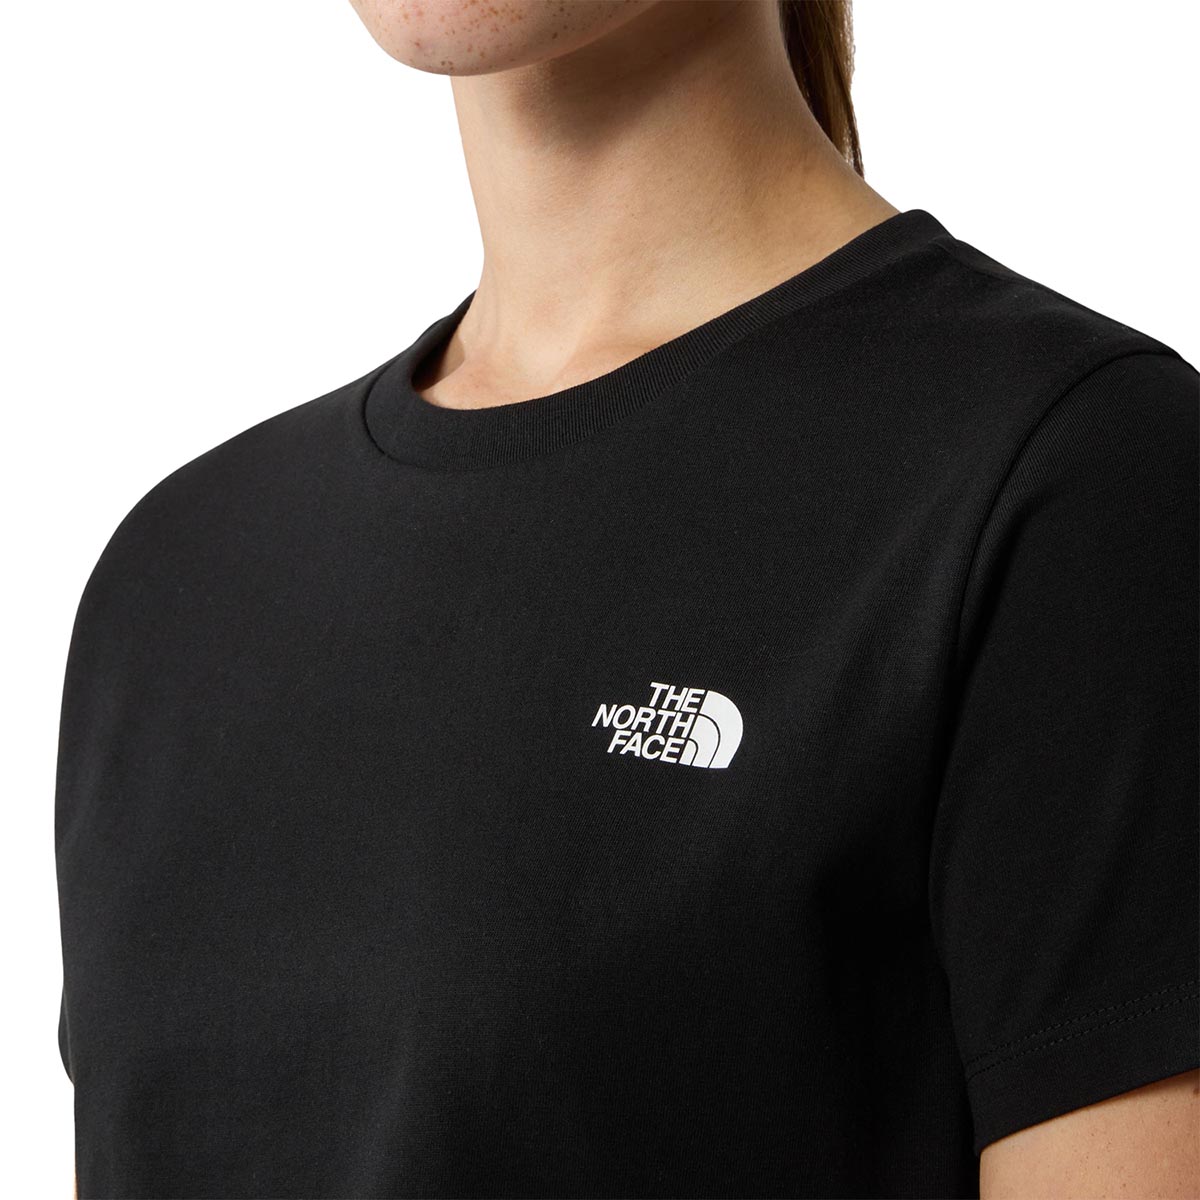 THE NORTH FACE - SIMPLE DOME